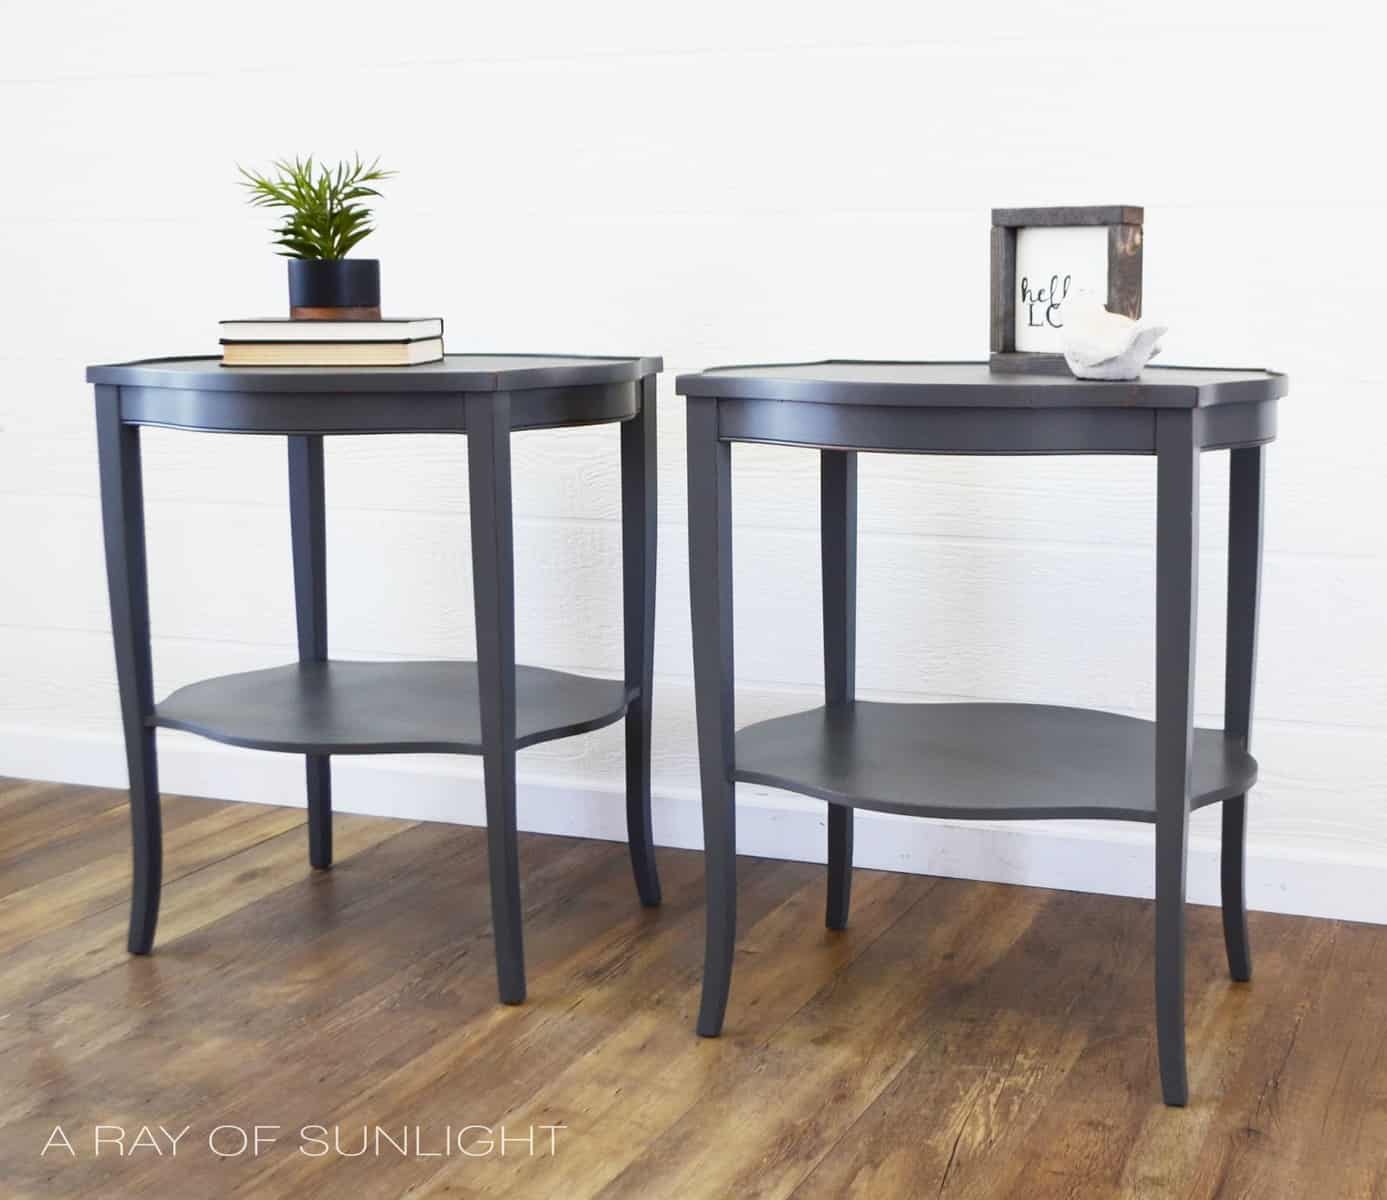 Warm Grey Nightstand Makeover #DIY #furniturepaint #paintedfurniture #homedecor #endtable #charcoal #grey #chalkpaint #countrychicpaint - blog.countrychicpaint.com